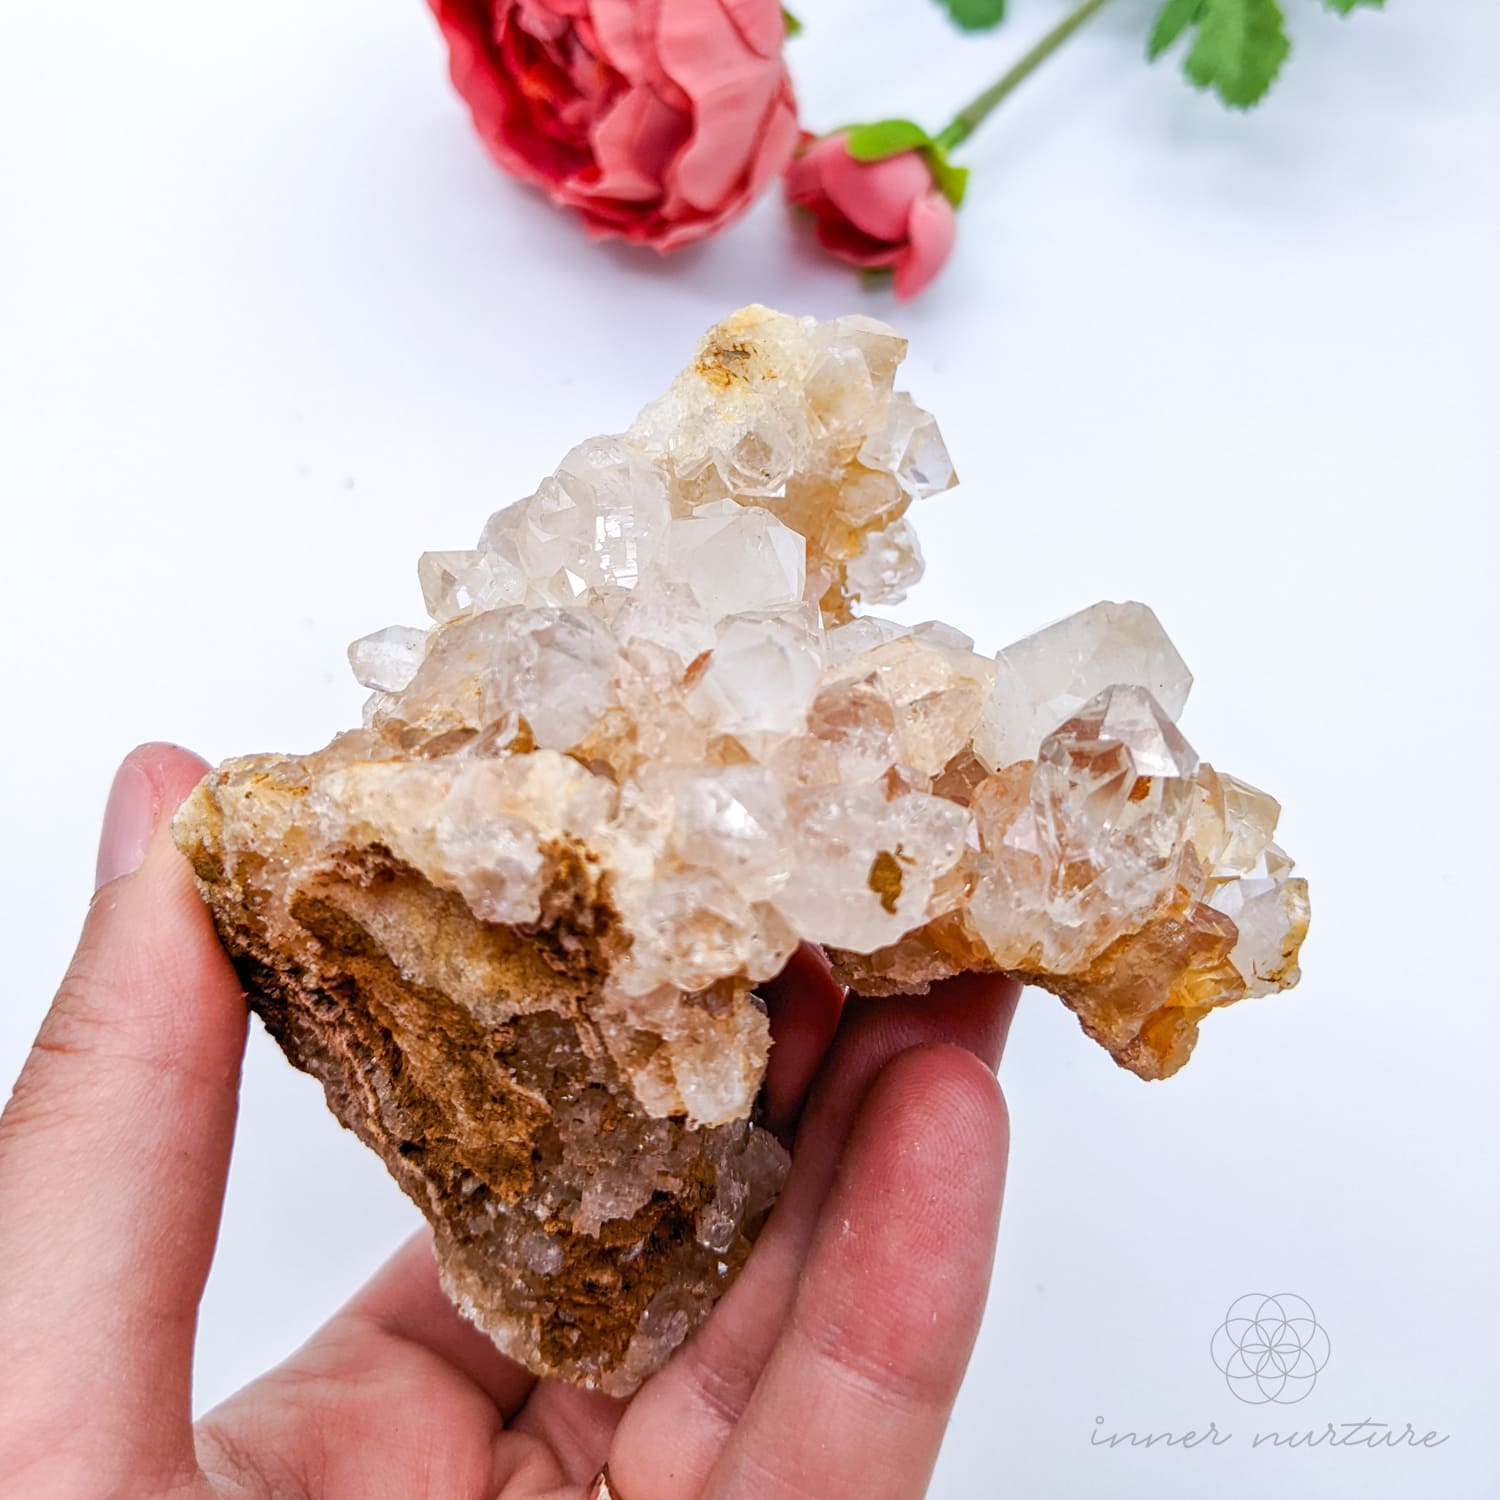 Clear Quartz Cluster With Inclusions - #15 | Crystal Shop Australia - Inner Nurture